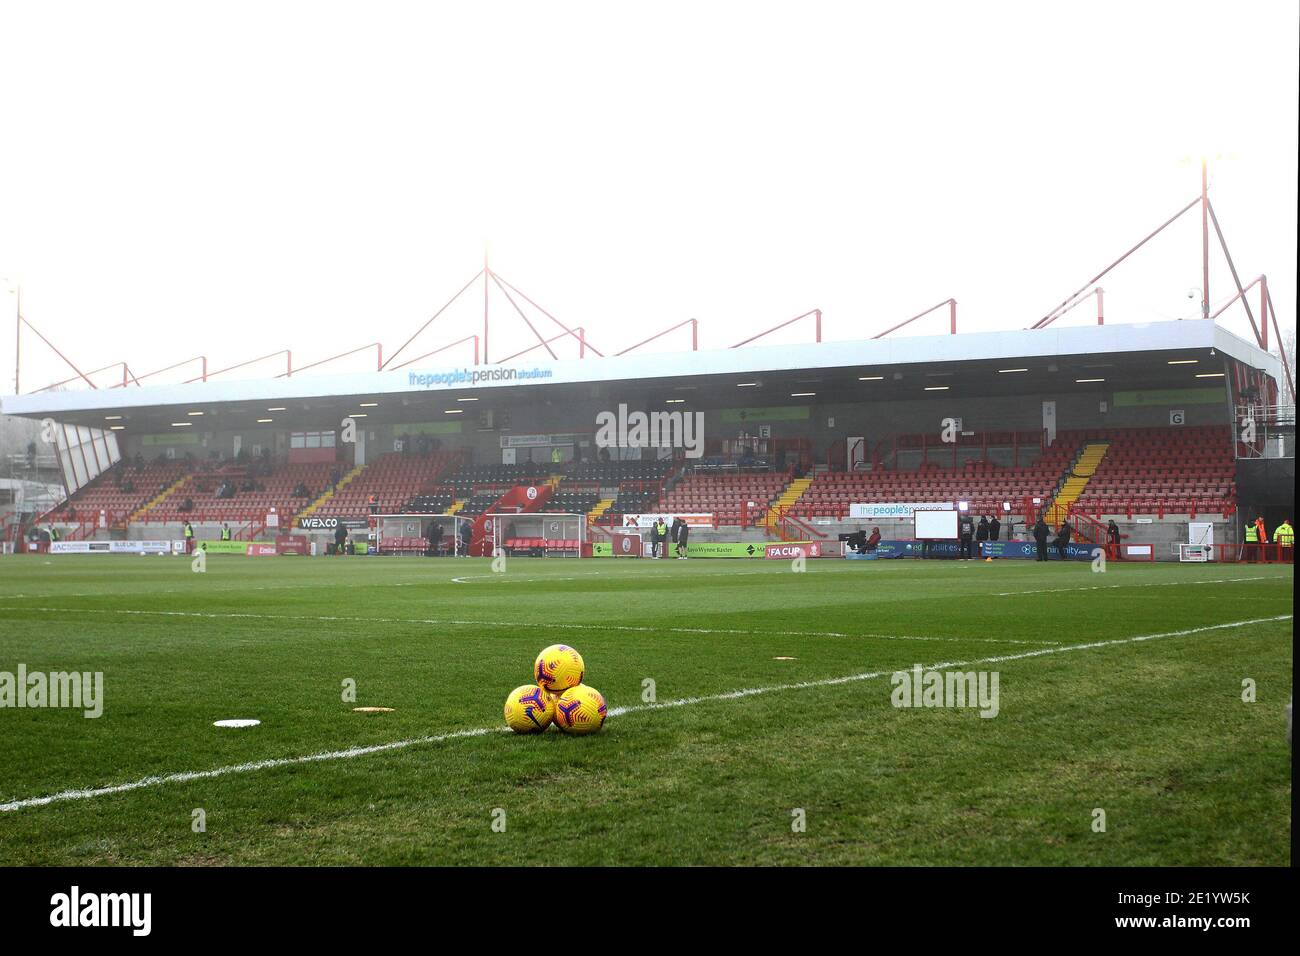 Crawley, UK. 10th Jan, 2021. CRAWLEY, ENGLAND - JANUARY 10: A general view during The FA Cup Third Round between Crawley Town and Leeds United at The People's Pension Stadium, Crawley, UK on 10th January 2021 Credit: Action Foto Sport/Alamy Live News Stock Photo